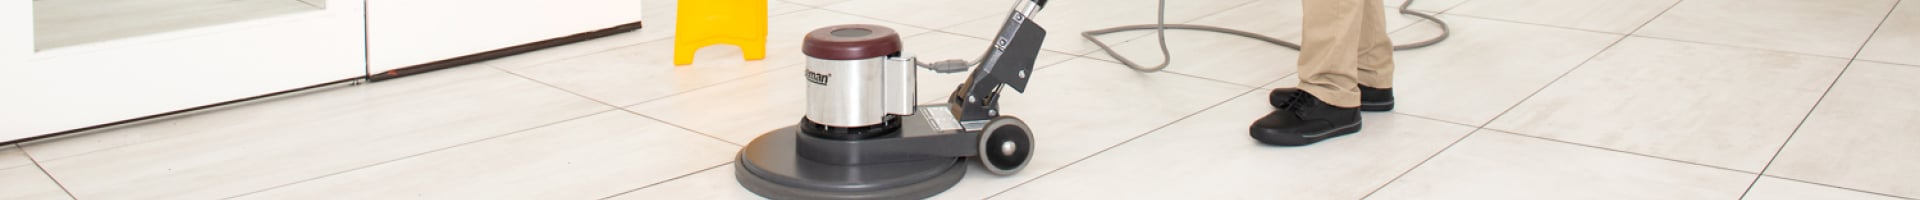 A Stratus Franchisee is Operating a Floor Cleaning Machine in a Commercial Office Building